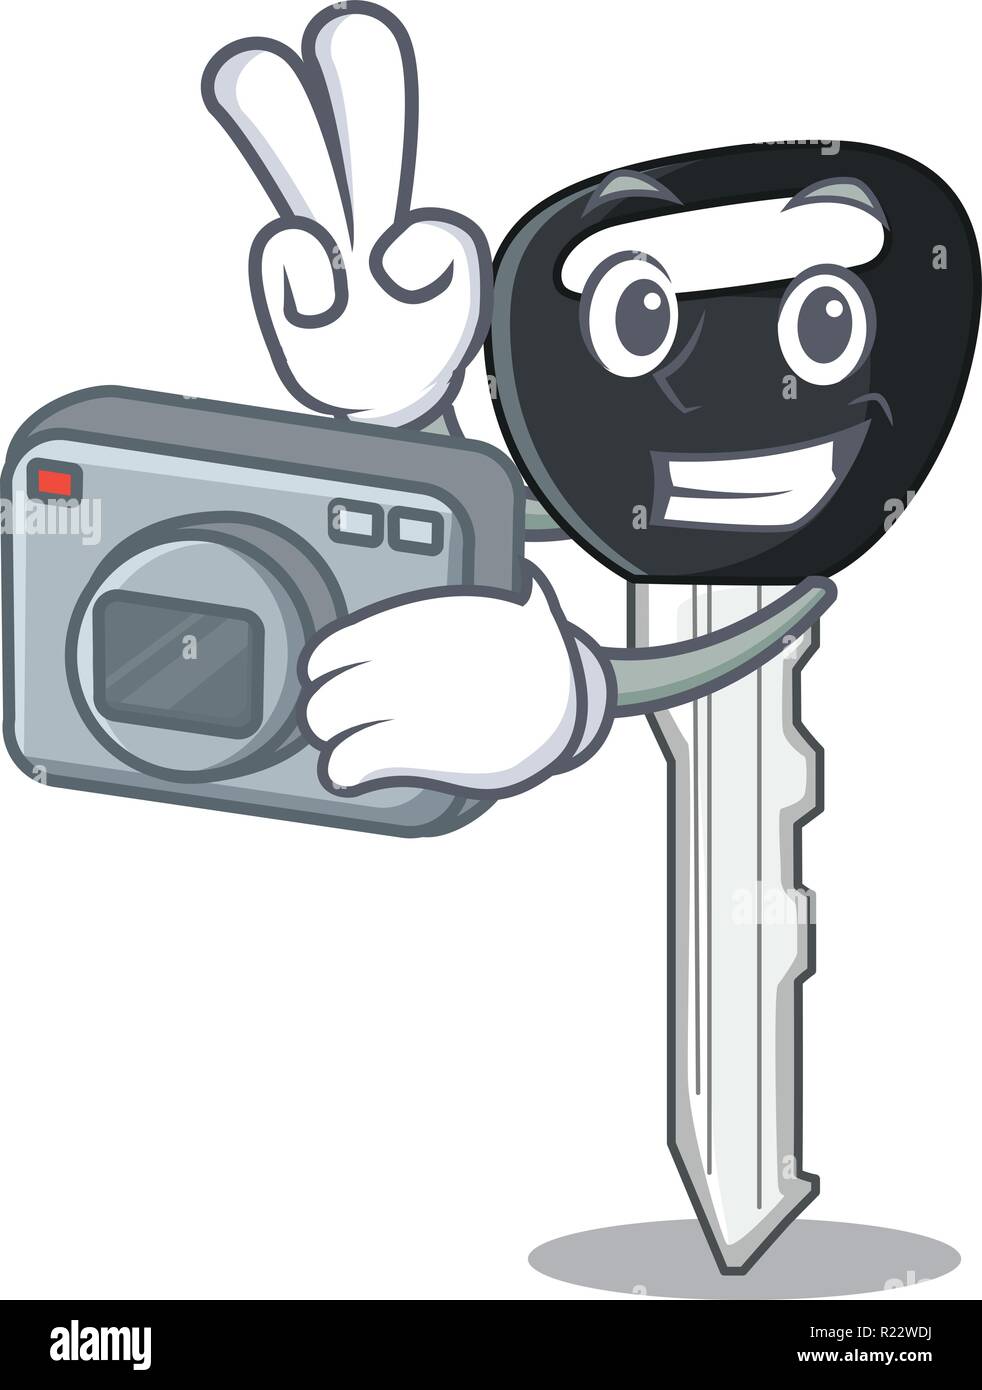 Photographer mascot ilustration featuring on car key Stock Vector